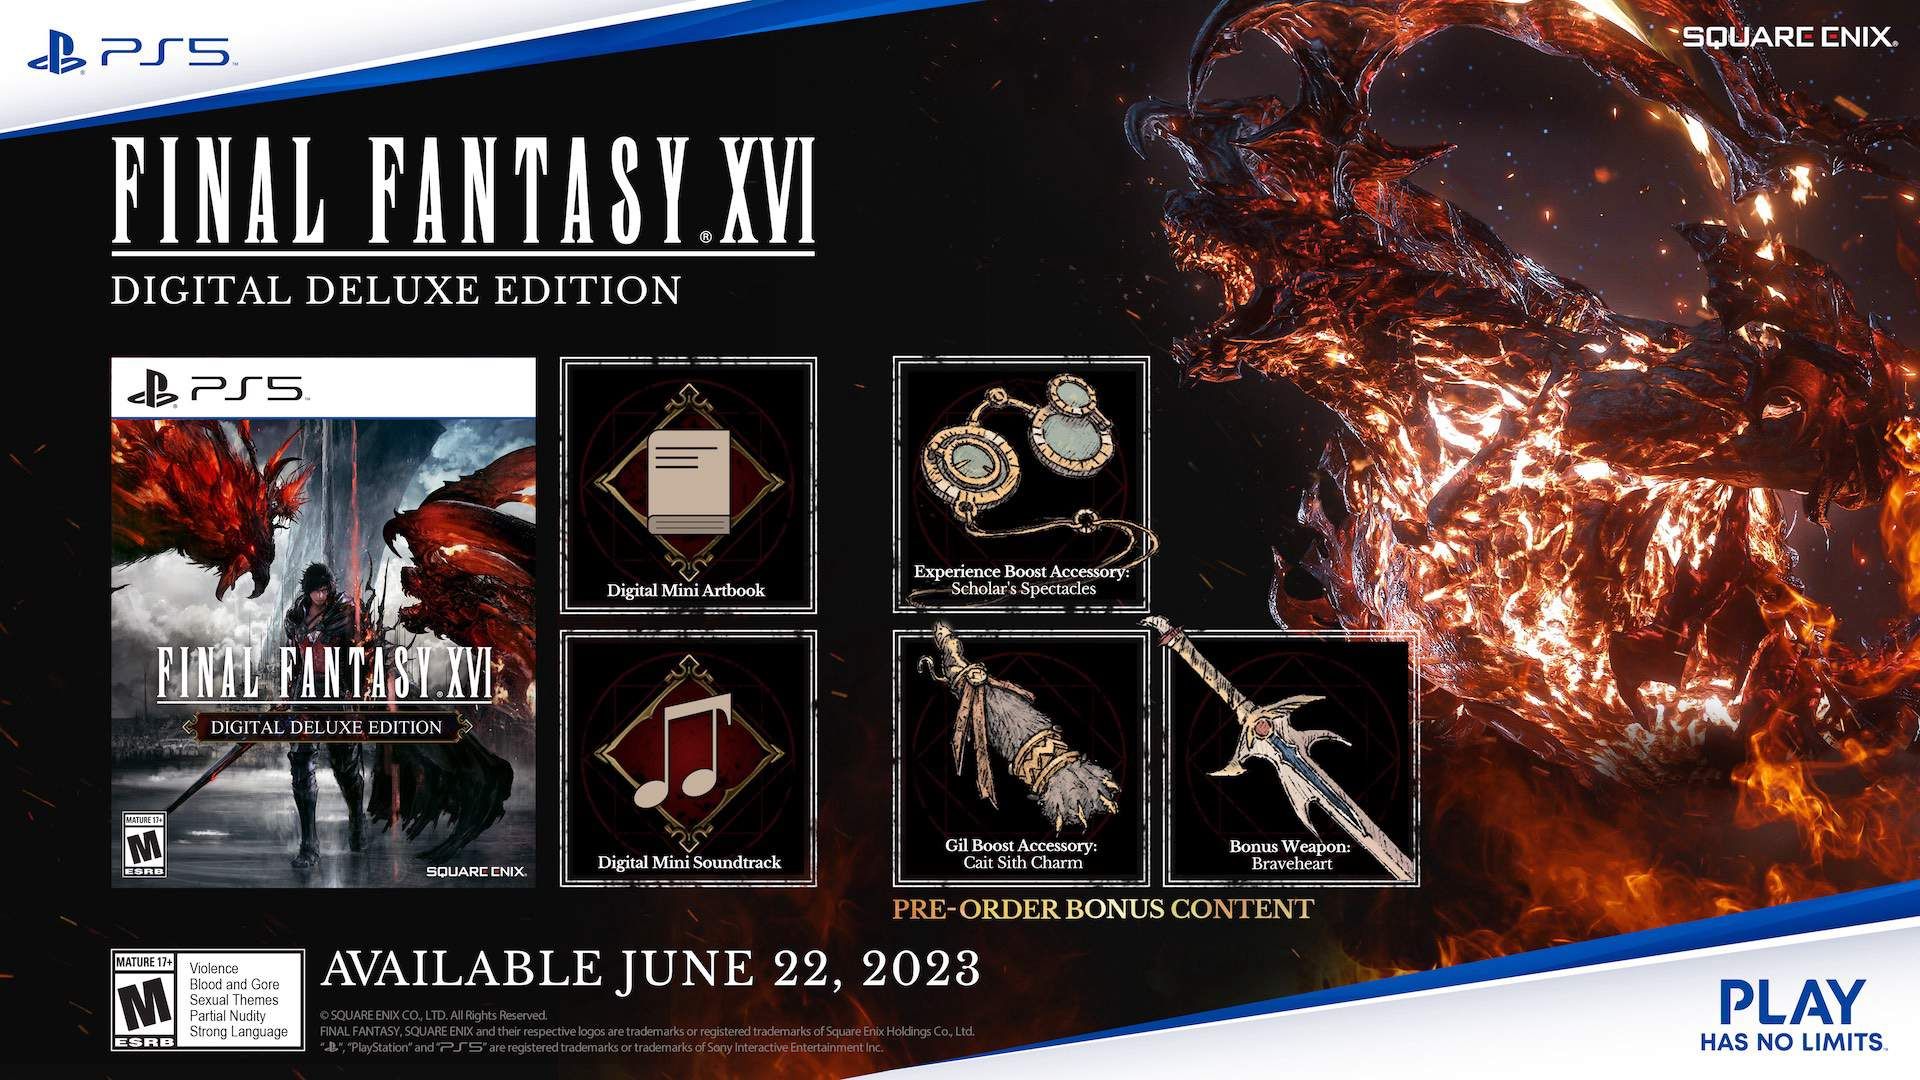 FF16 Digital Deluxe Edition art and included digital rewards